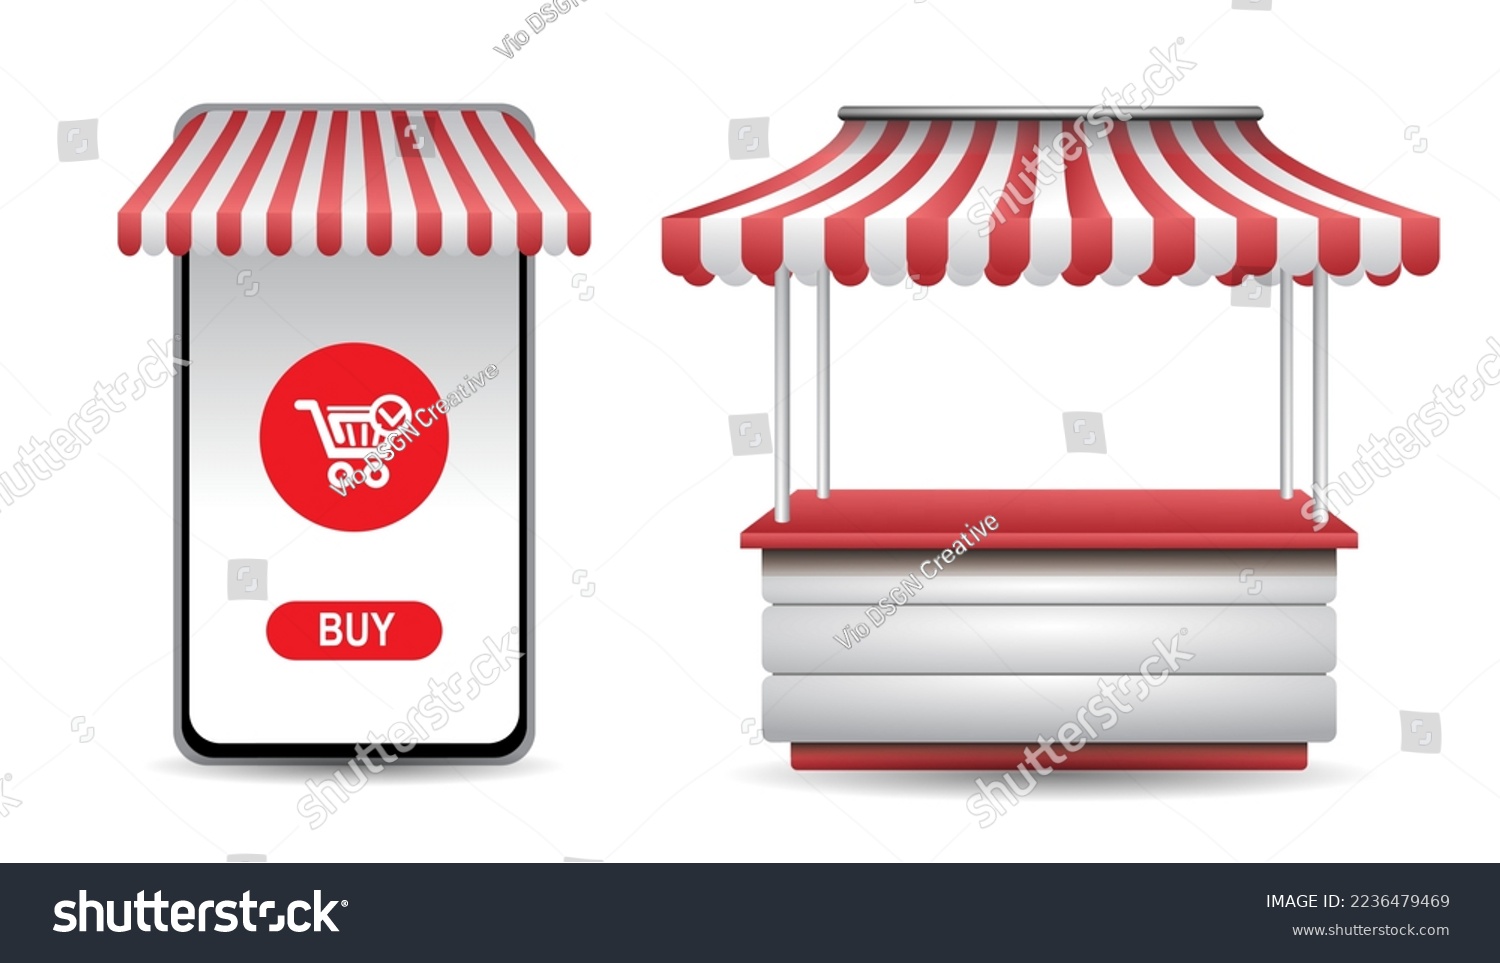 illustration of market stall or mobile commerce with red and white awning striped isolated #2236479469